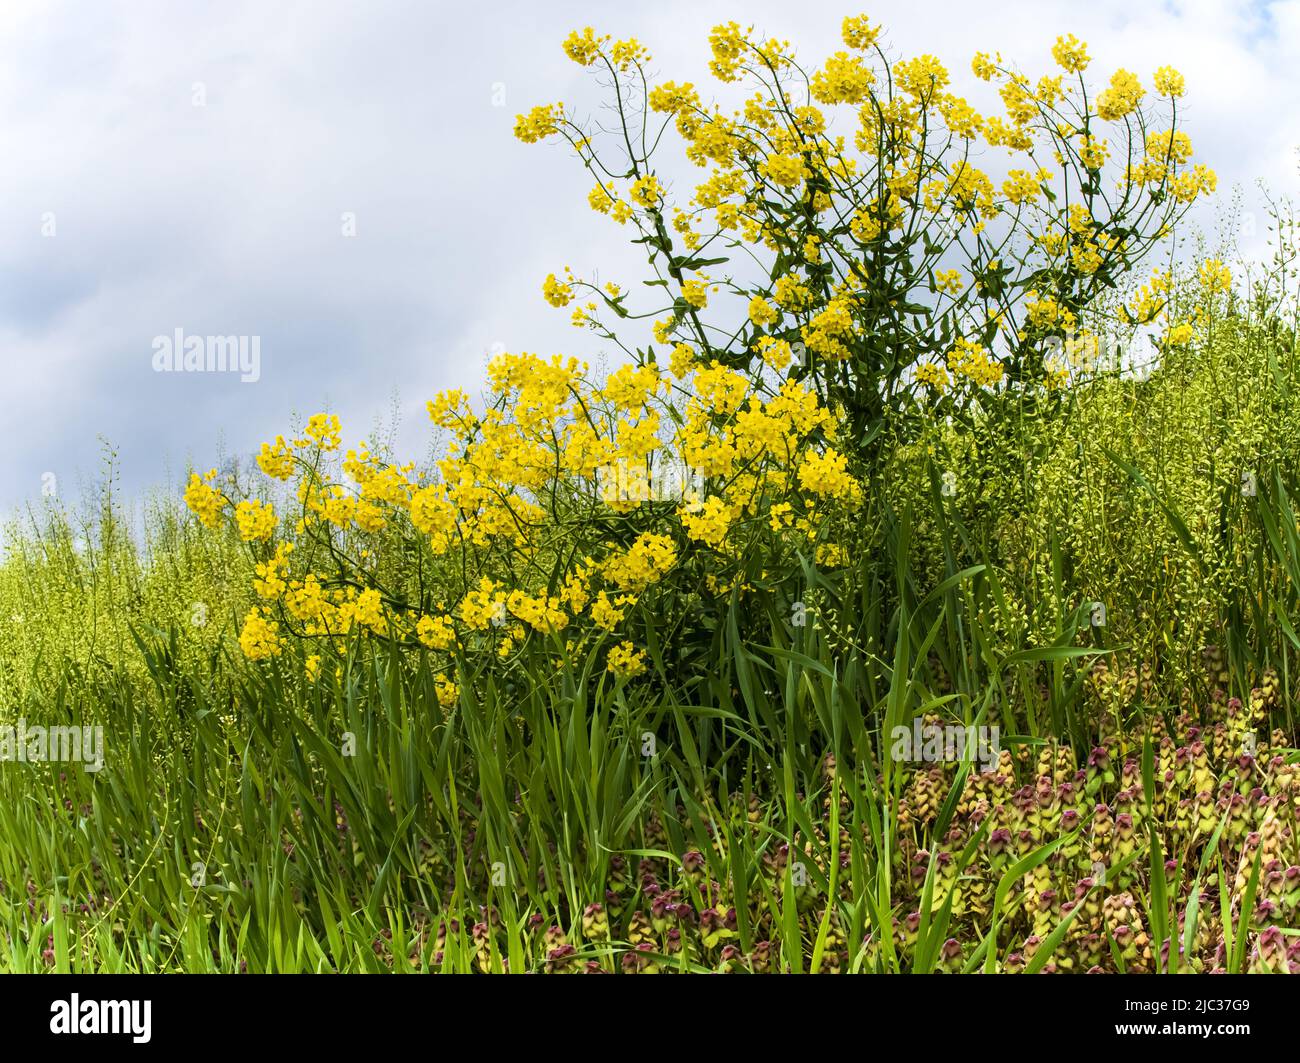 A yellow flowering mustard plant on a hill surrounded by spring green foliage and under a clouded blue sky in spring or summer, Pennsylvania Stock Photo